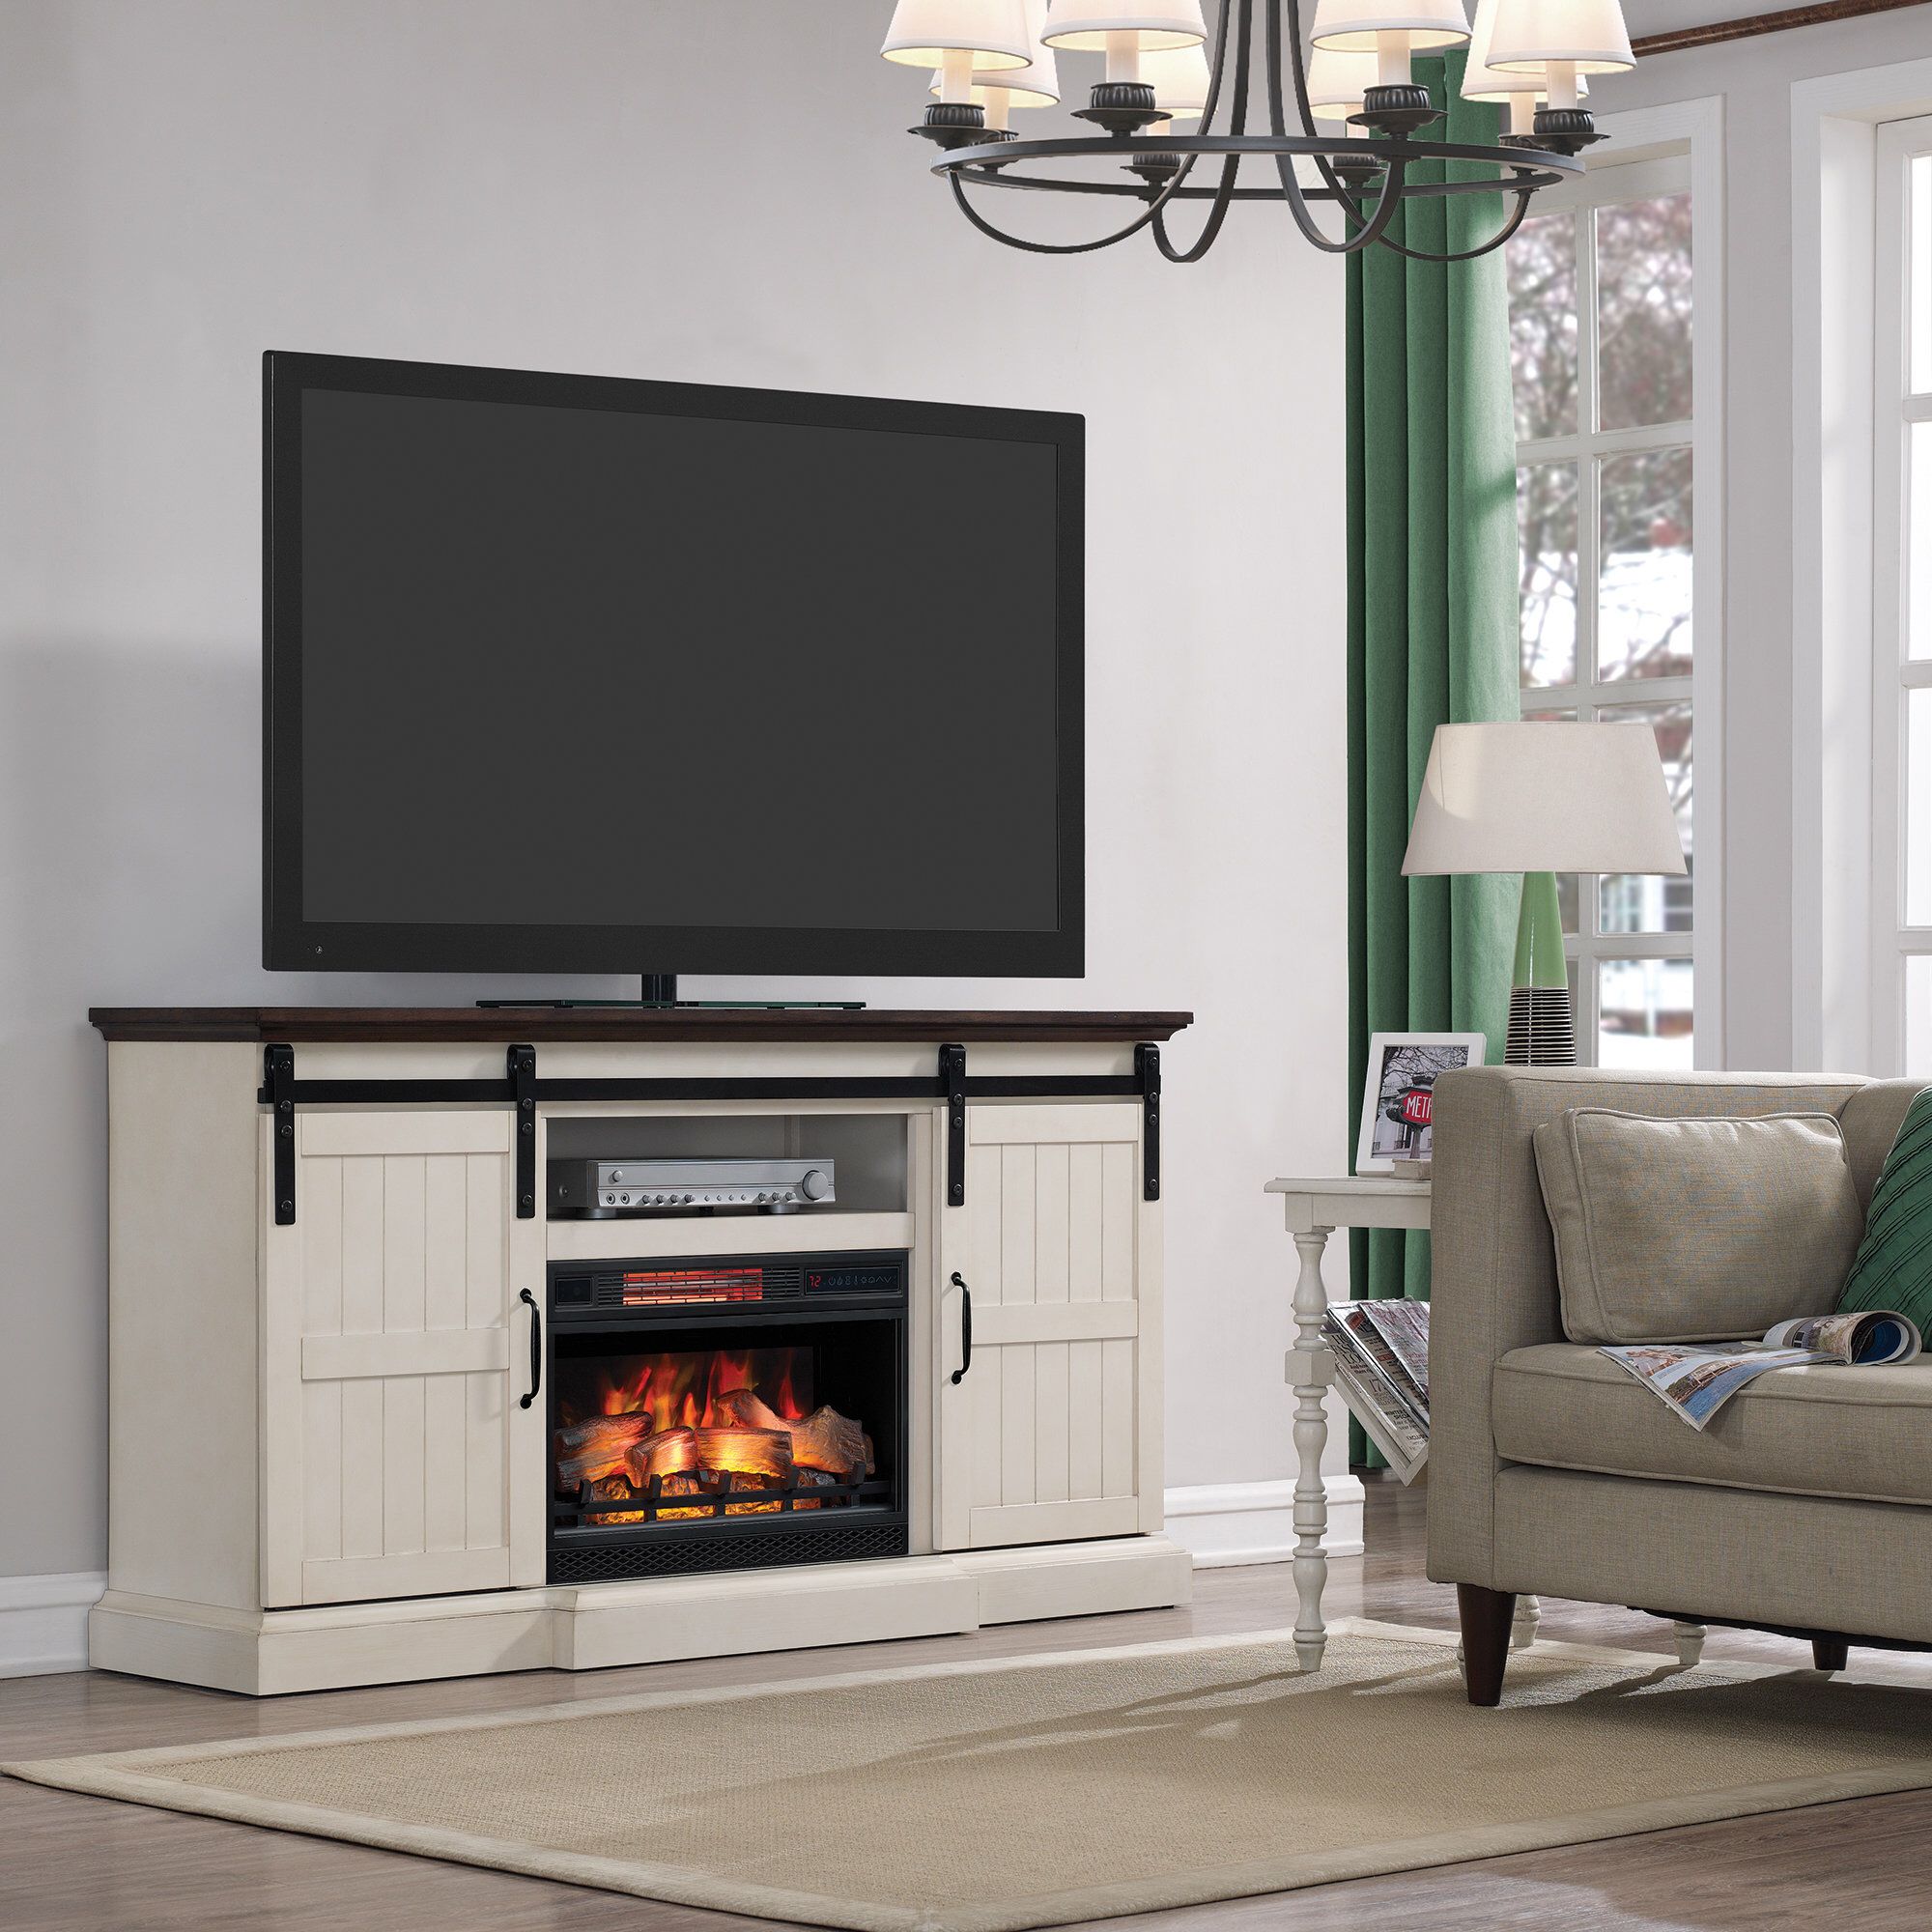 Living Room Fireplace Tv Fresh Glendora 66 5" Tv Stand with Electric Fireplace